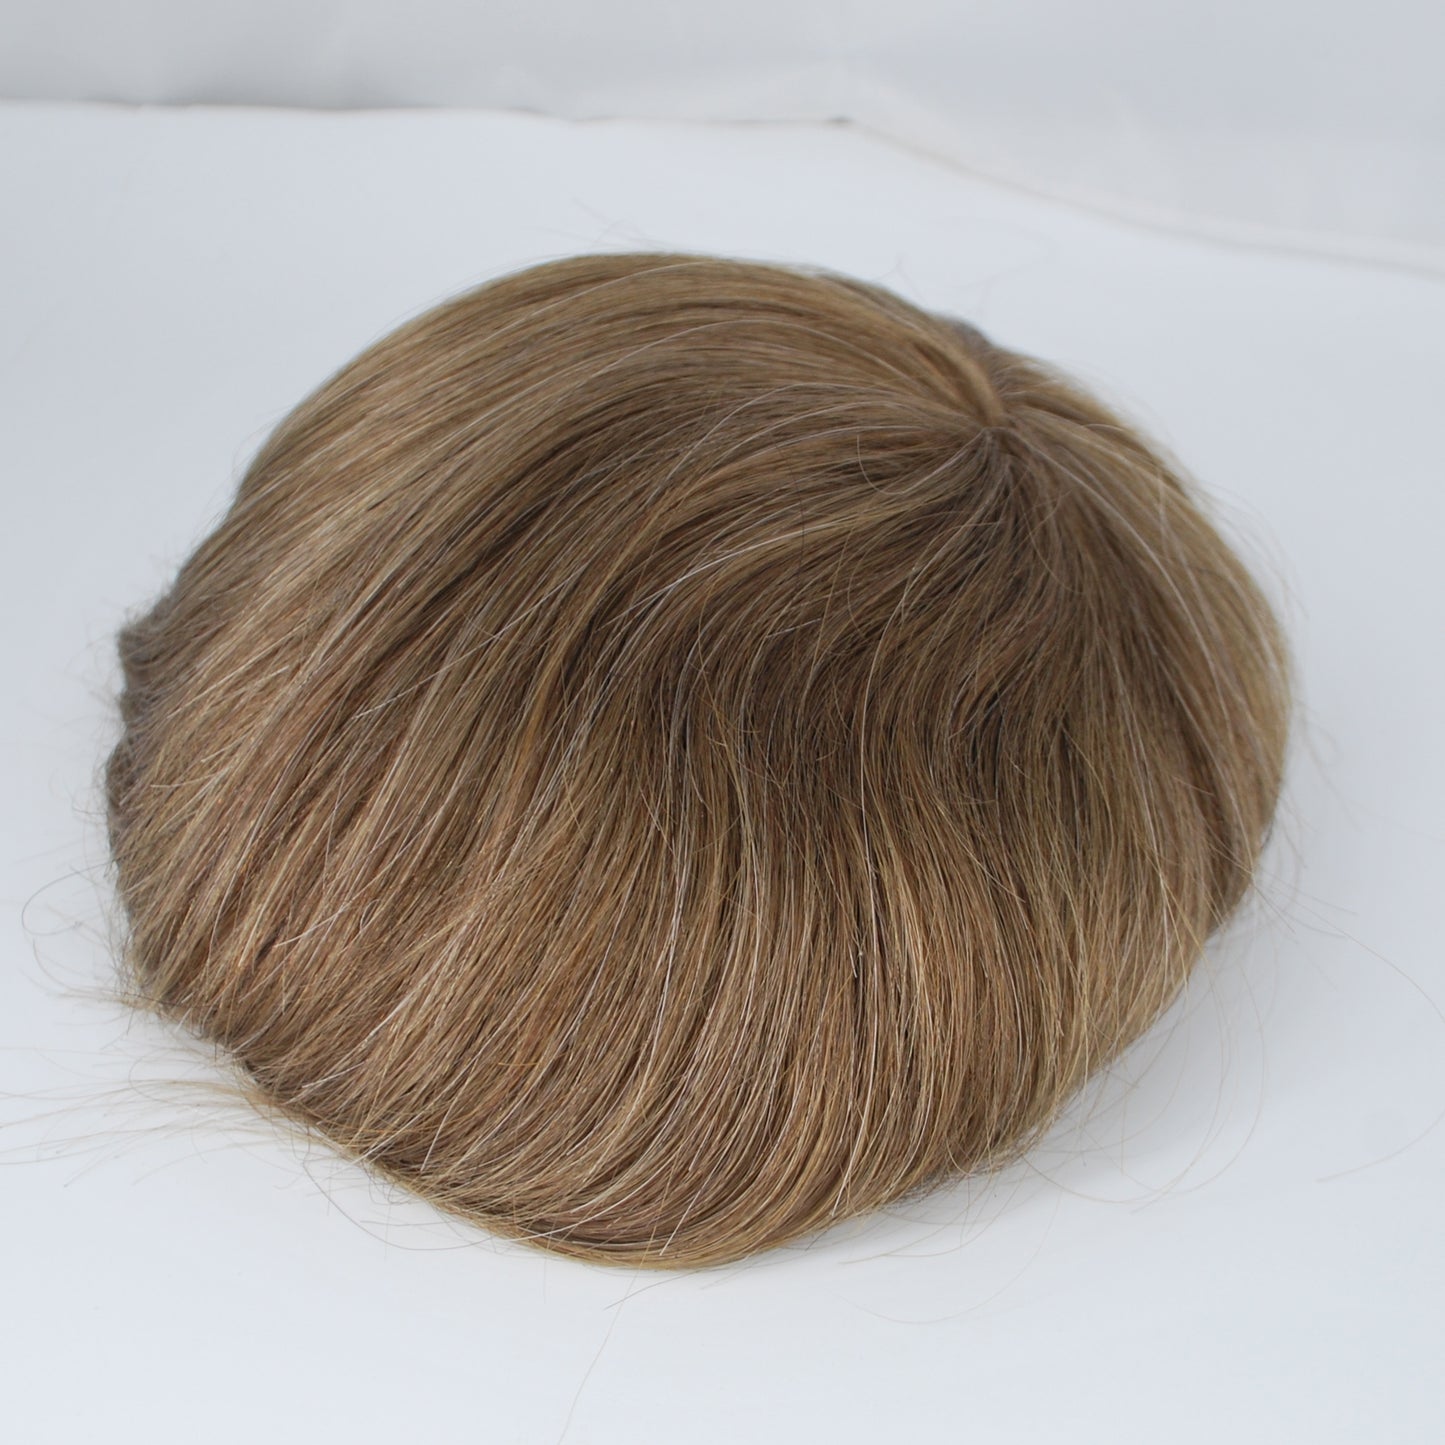 Clearance 9x7" toupee for men  #6 light brown mixed 10% grey hair french lace hair system